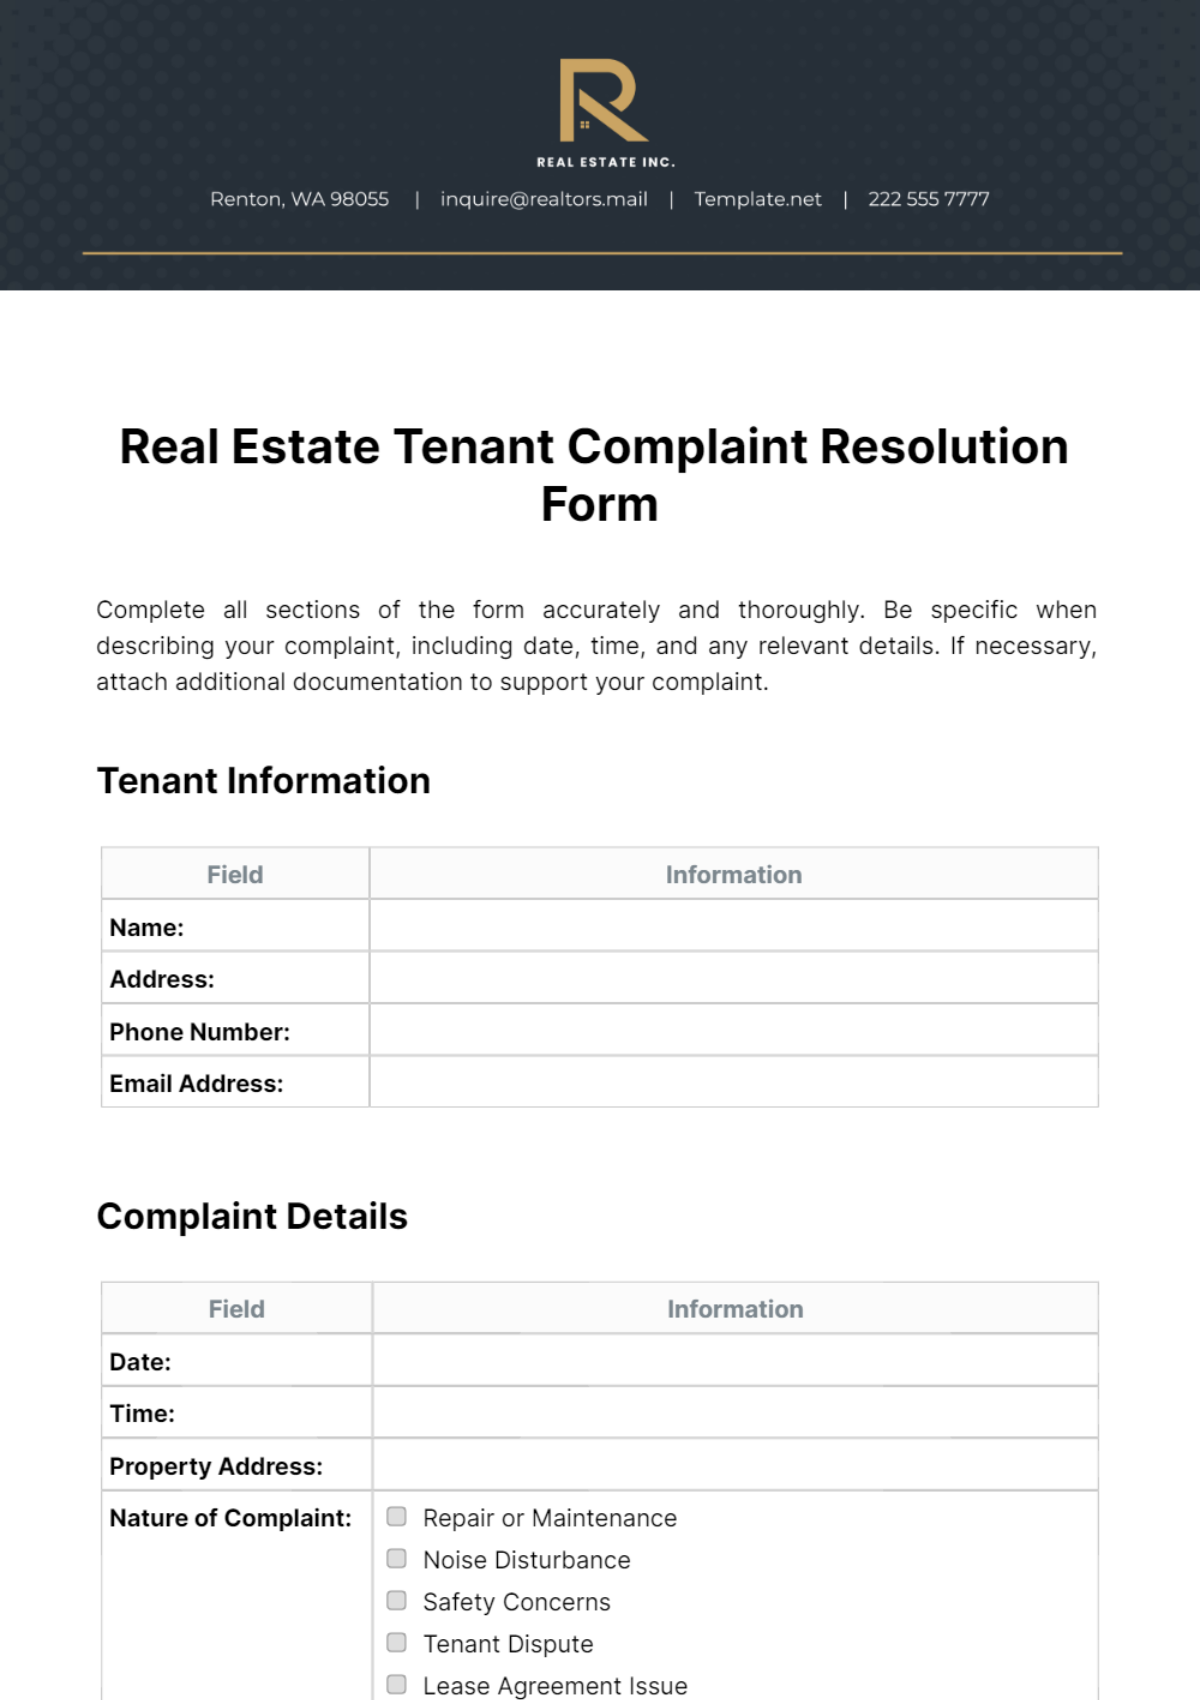 Real Estate Tenant Complaint Resolution Form Template